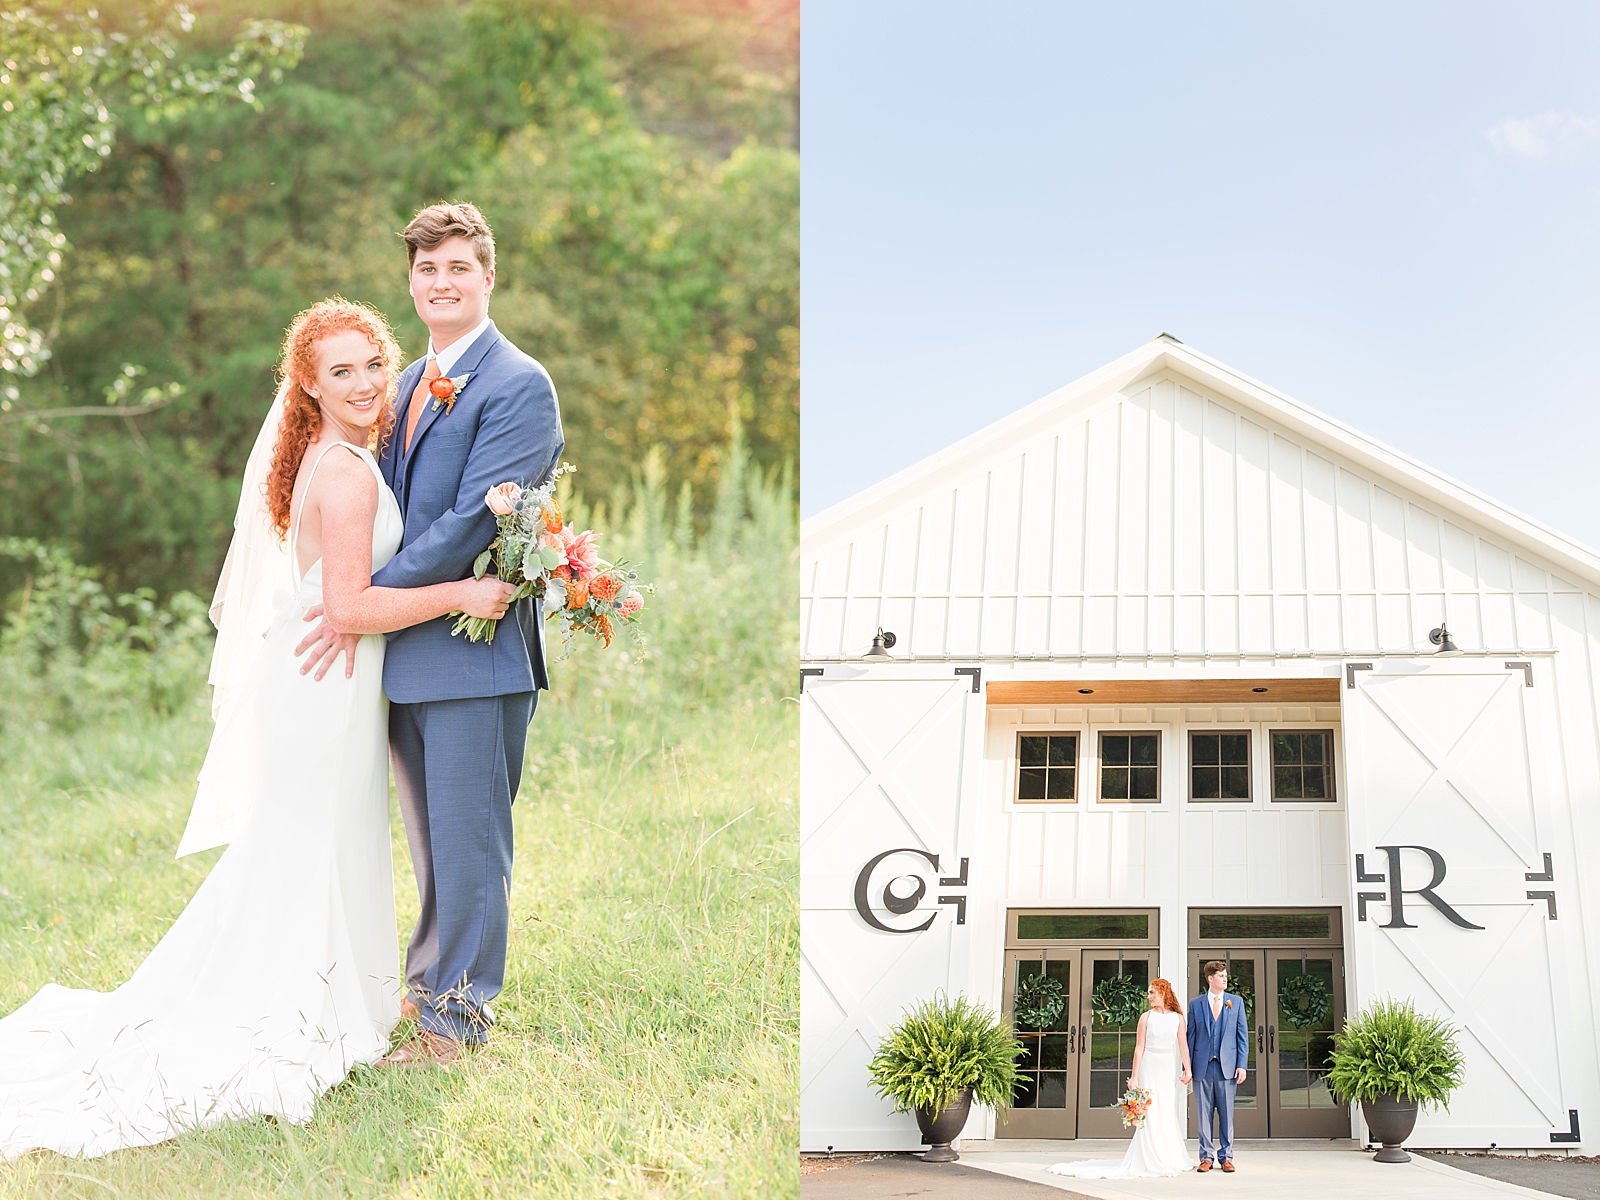 Chestnut Ridge Wedding bride and groom hugging in field and bride and groom looking opposite directions in front of white barn venue Photos